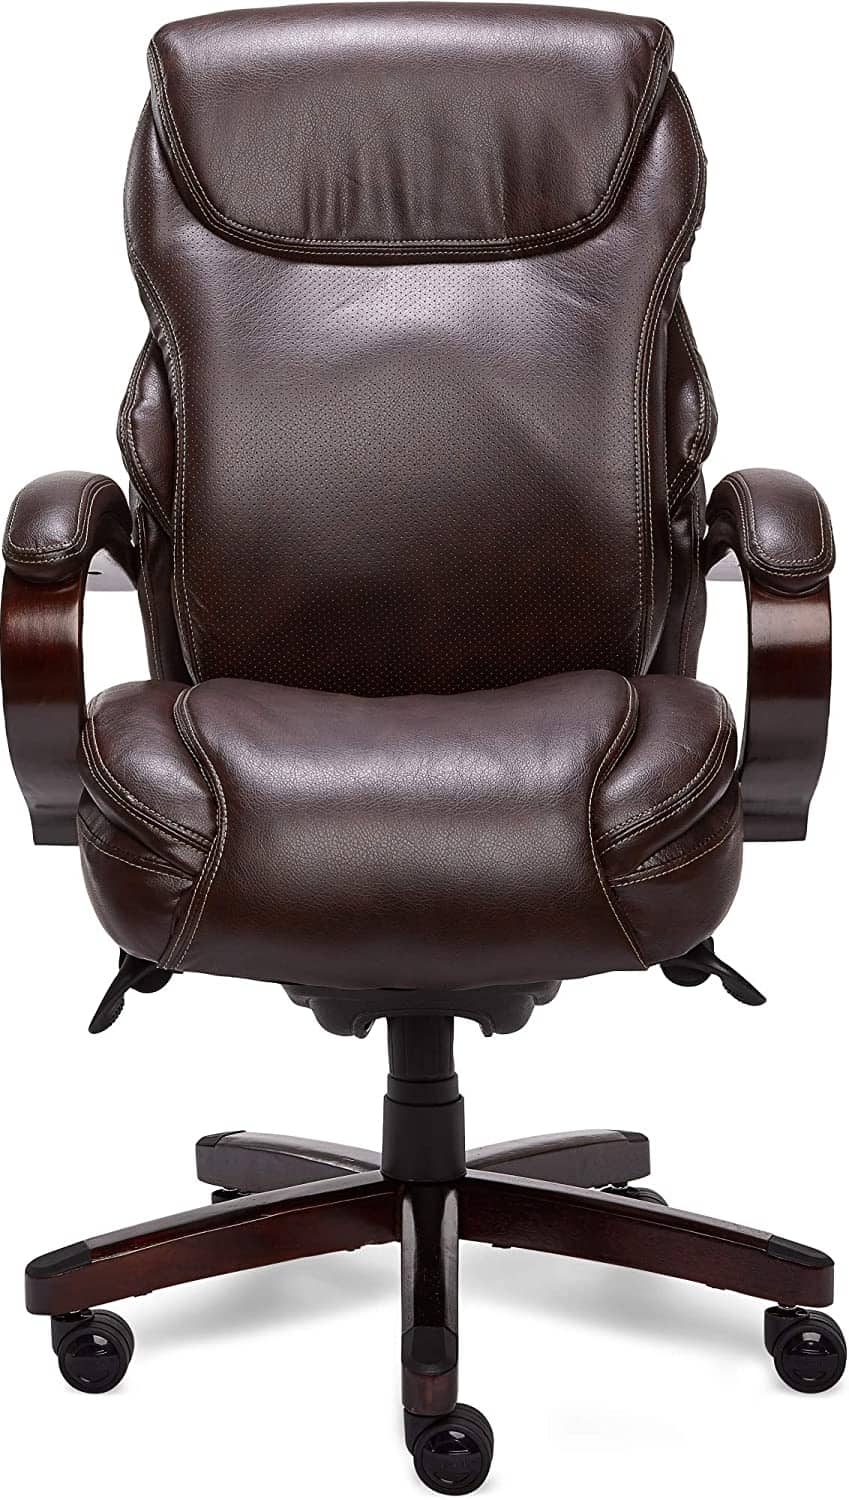 La-Z-Boy Hyland Executive Bonded Leather Office Chair Brown